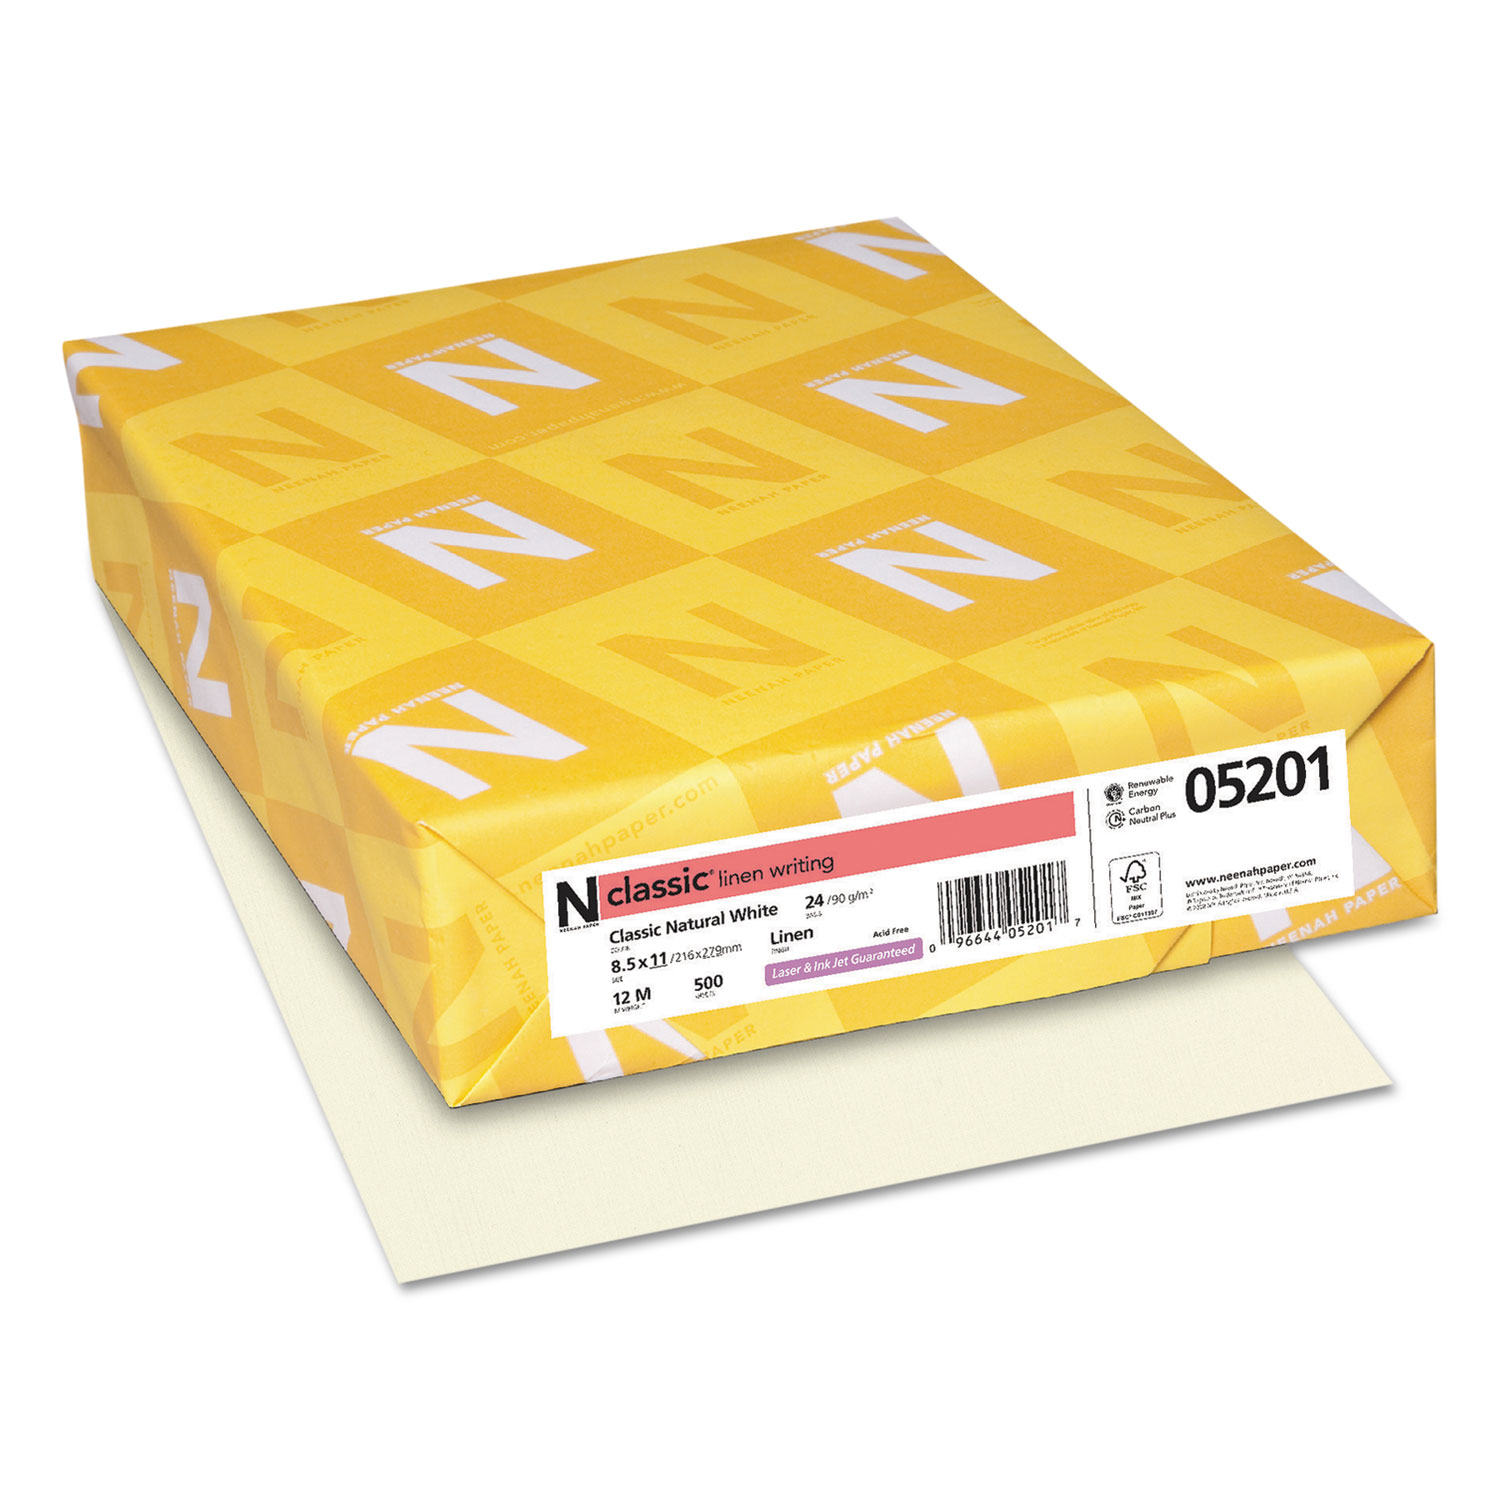  Neenah Paper 05201 CLASSIC Linen Stationery, 24 lb, 8.5 x 11, Classic Natural White, 500/Ream (NEE05201) 